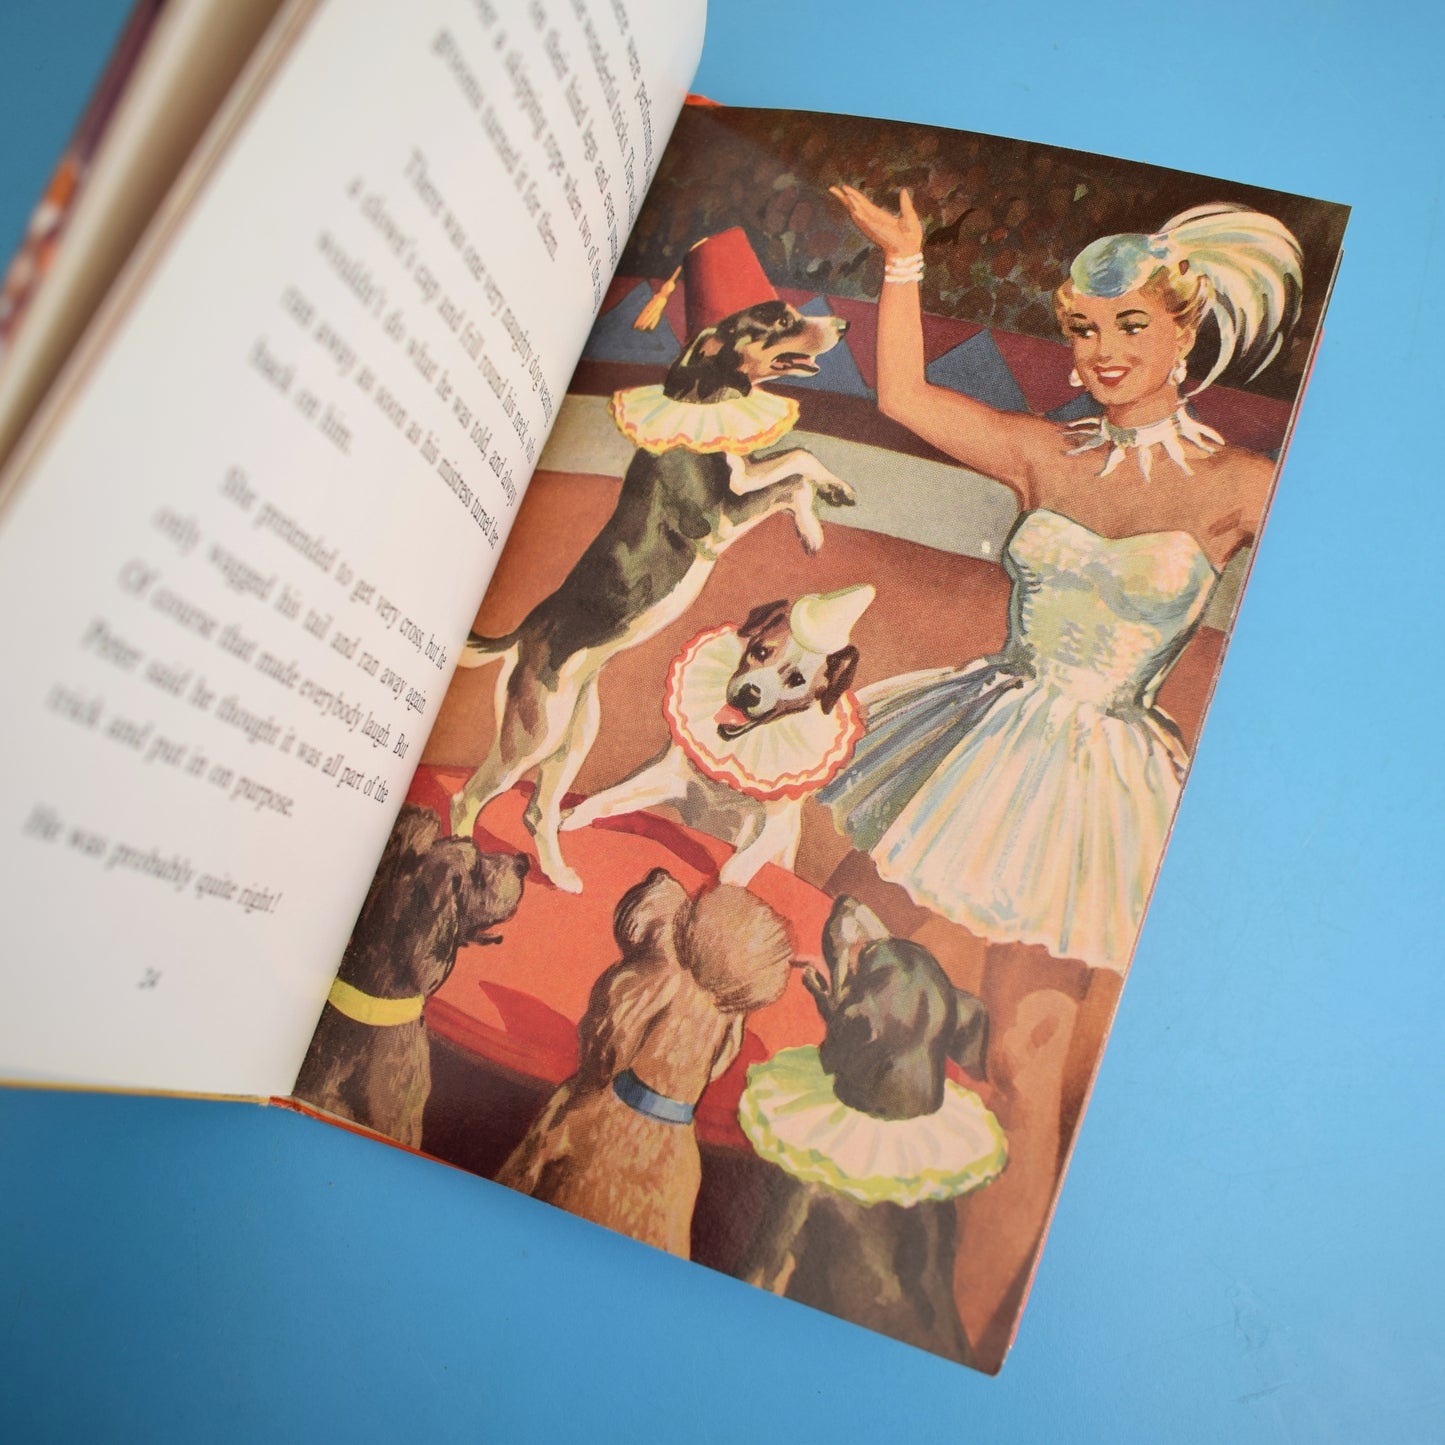 Vintage Ladybird Book - The Circus Comes To Town